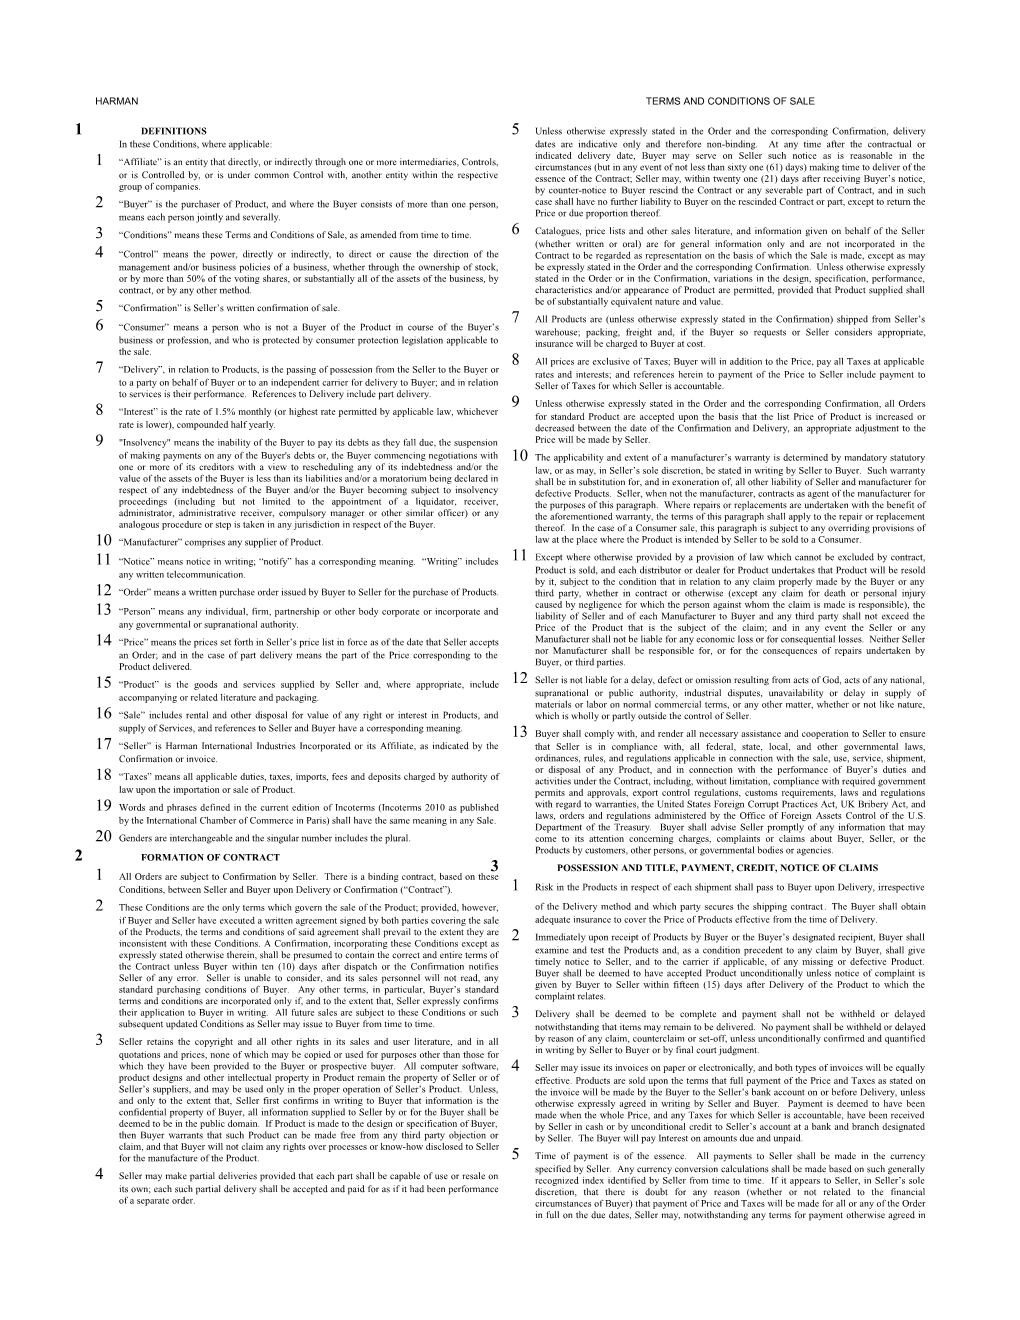 Harman Terms and Conditions of Sale